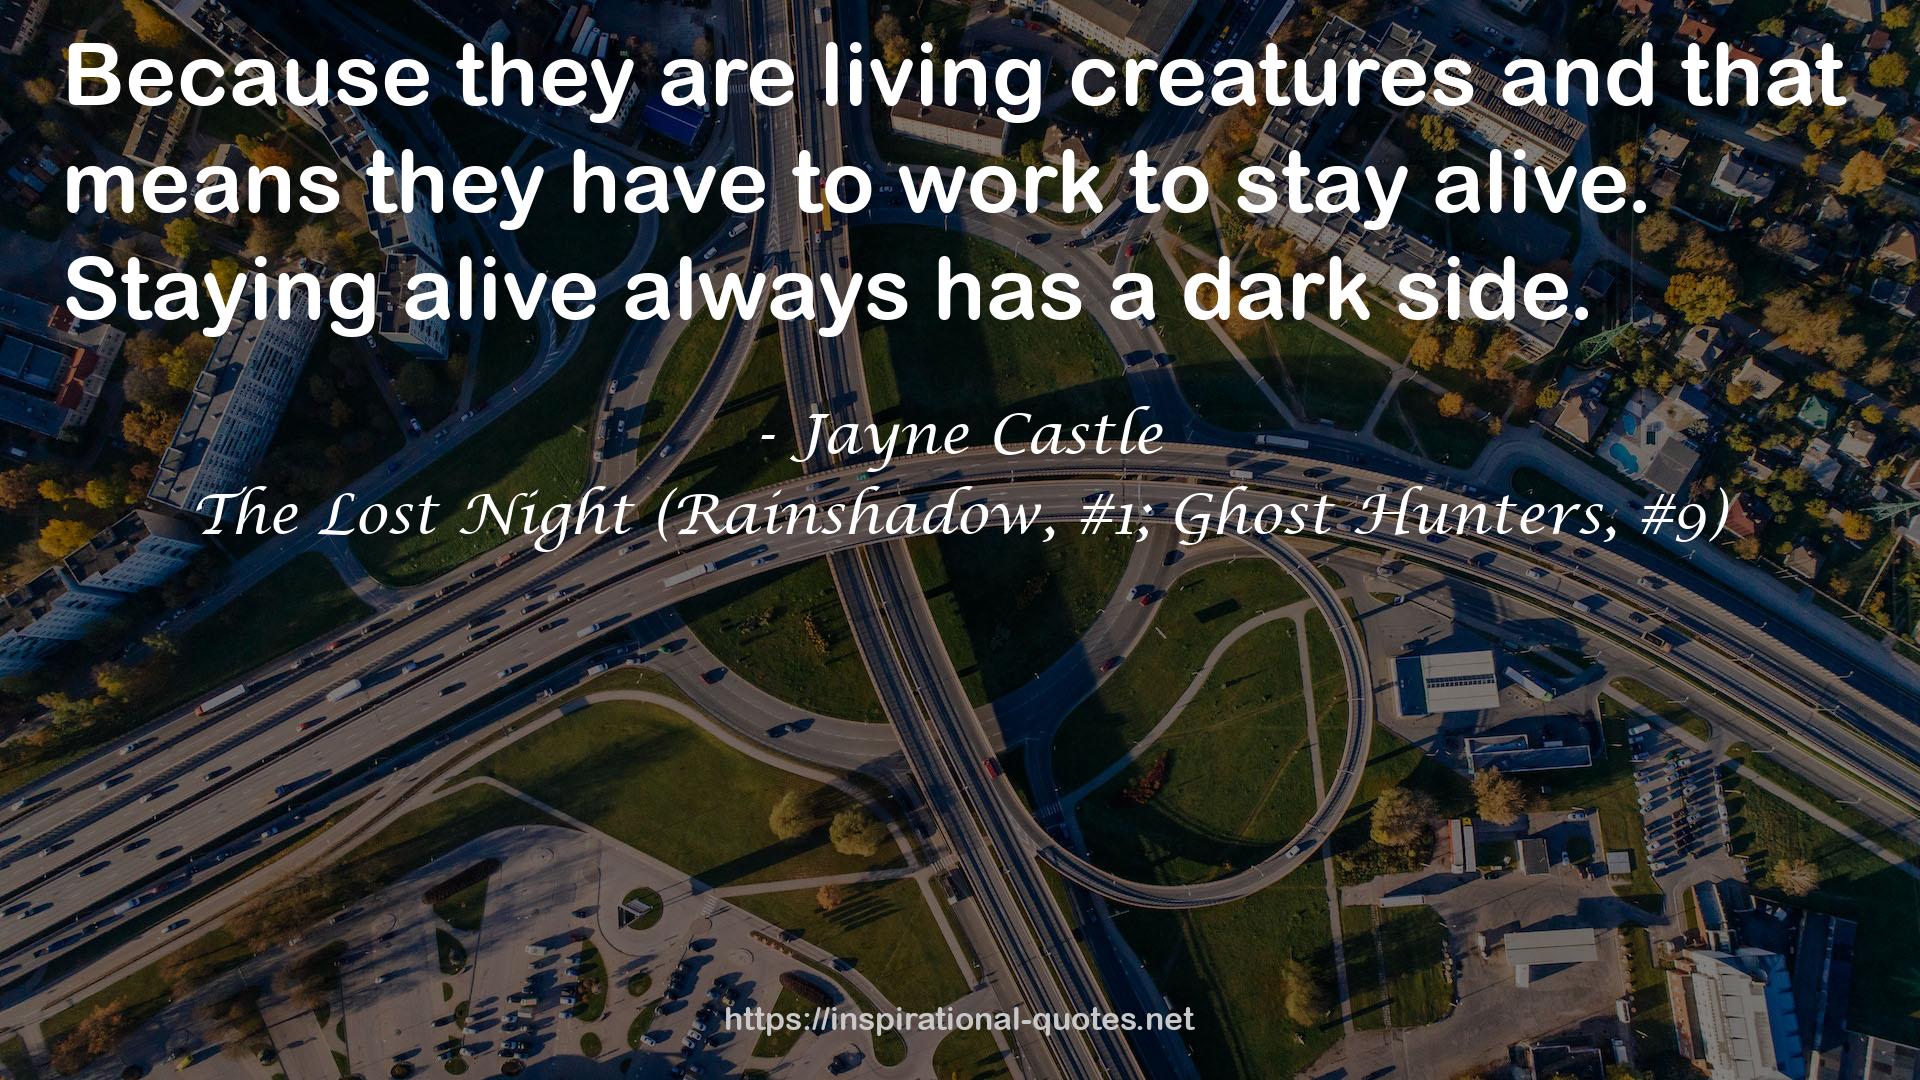 The Lost Night (Rainshadow, #1; Ghost Hunters, #9) QUOTES